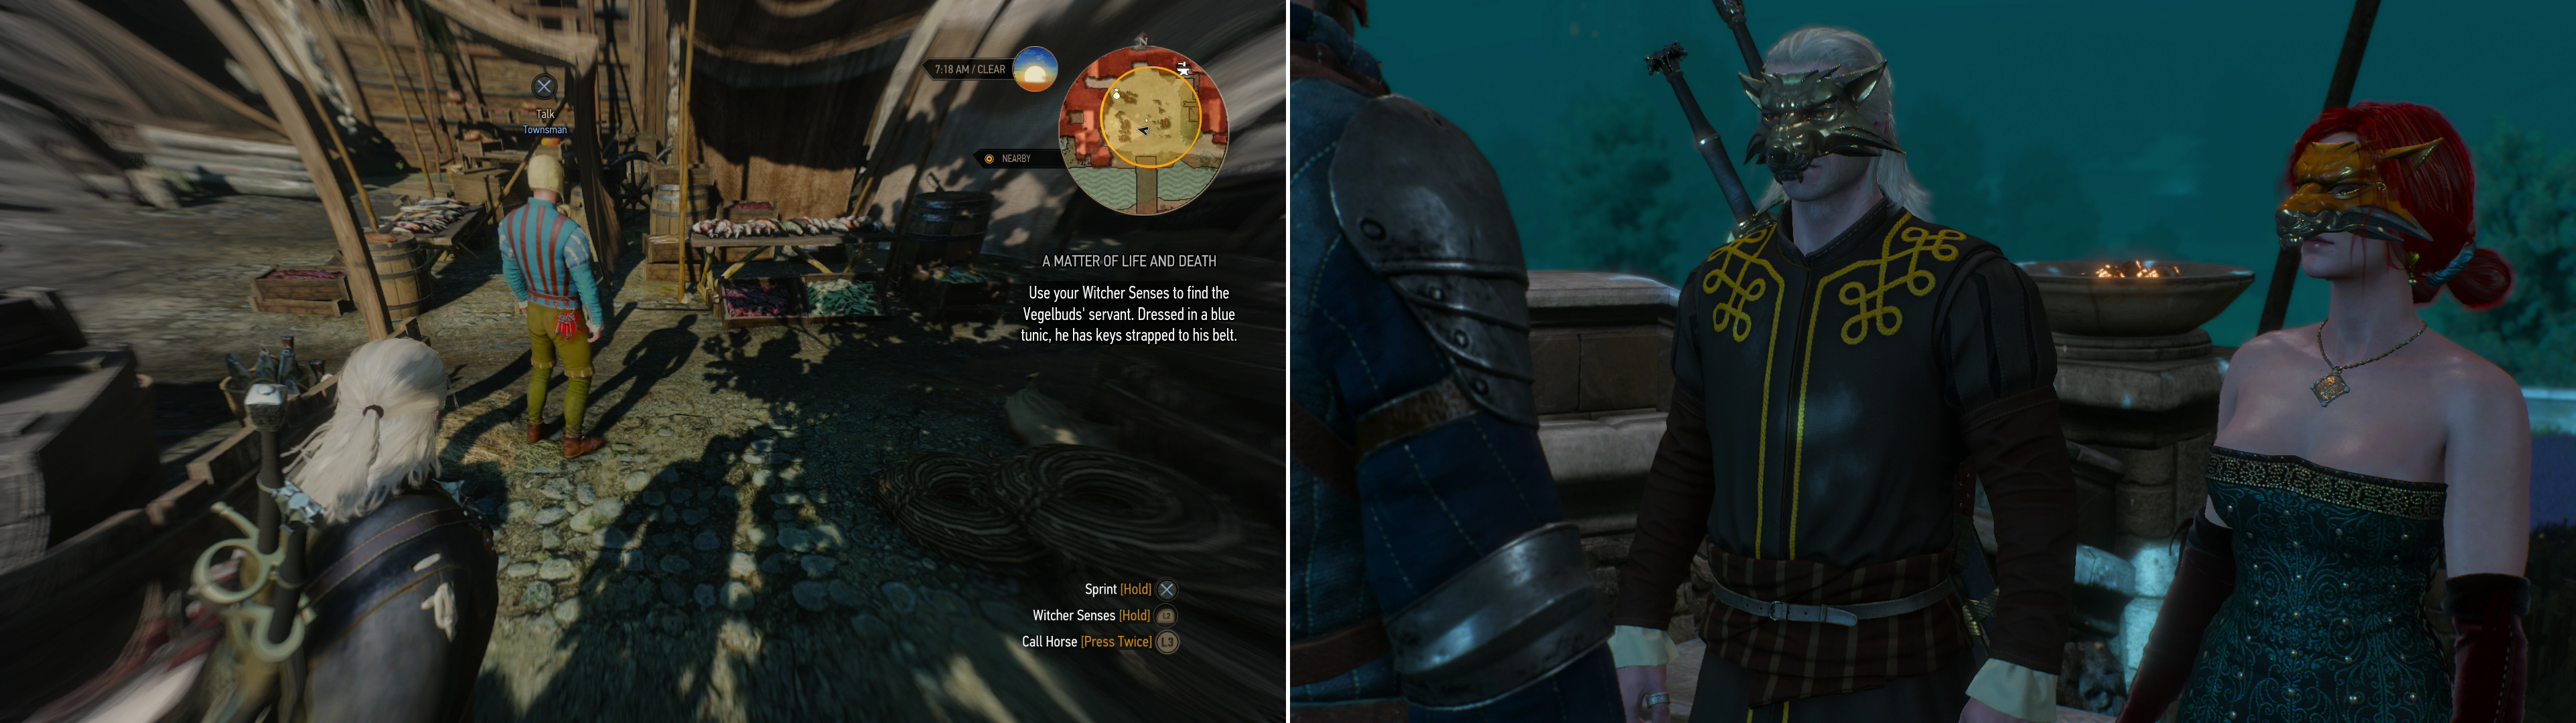 Find Triss’ contact in the fishmarket-his blue shirt and the keys he wears are dead giveaways (left). After some shopping, attend a party at the Vegelbud Estate with Triss (right).